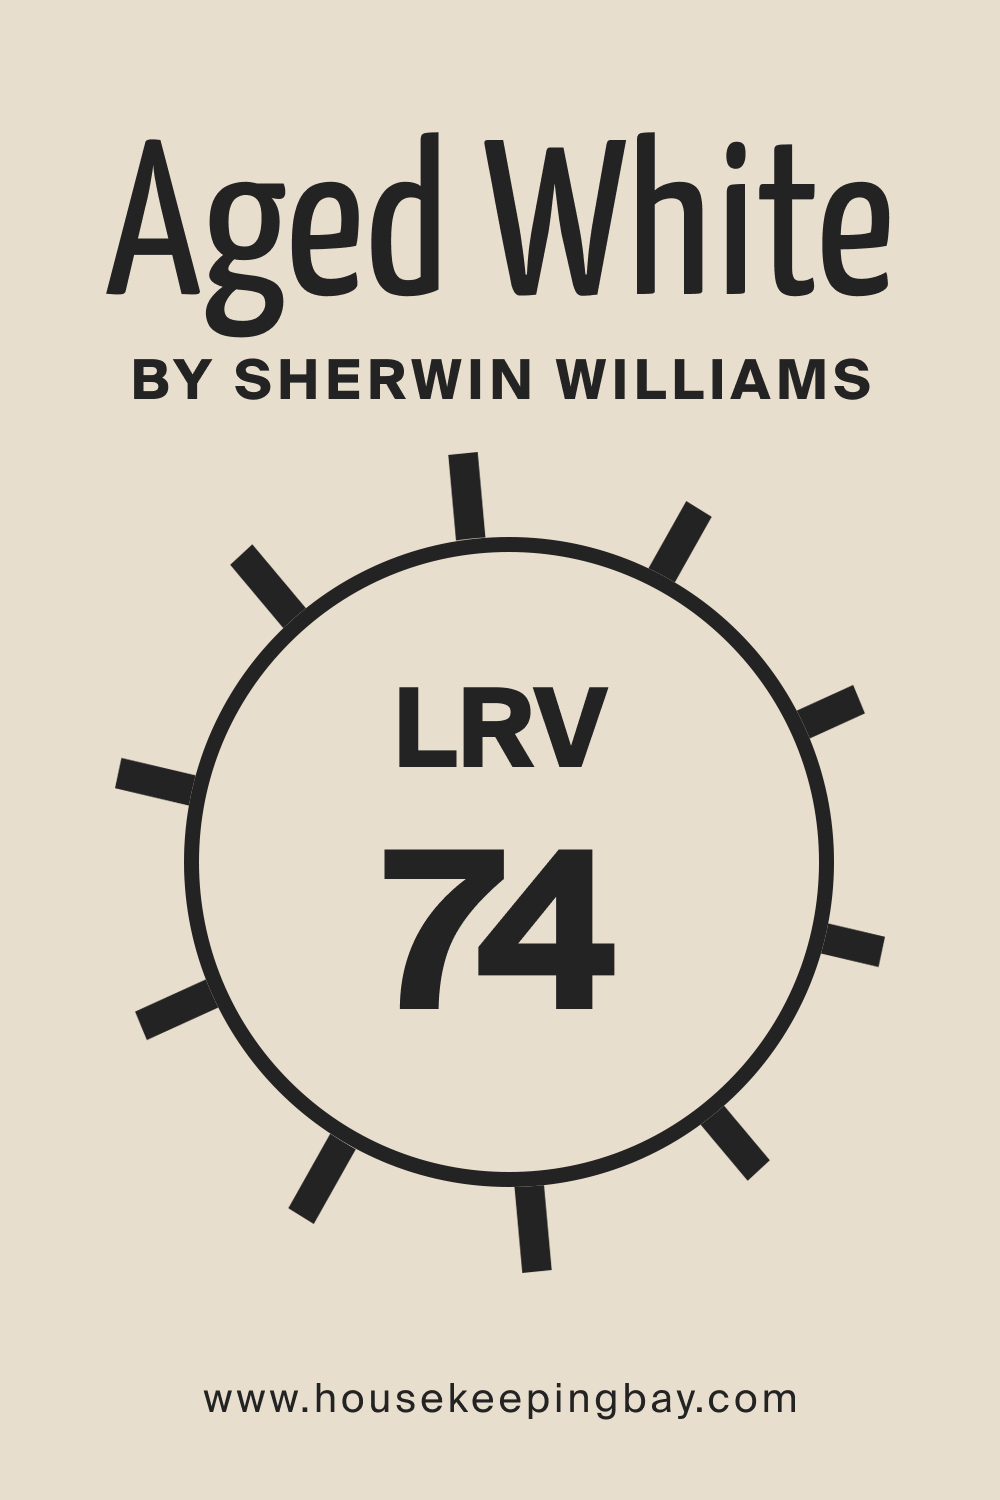 SW Aged White by Sherwin Williams. LRV – 74